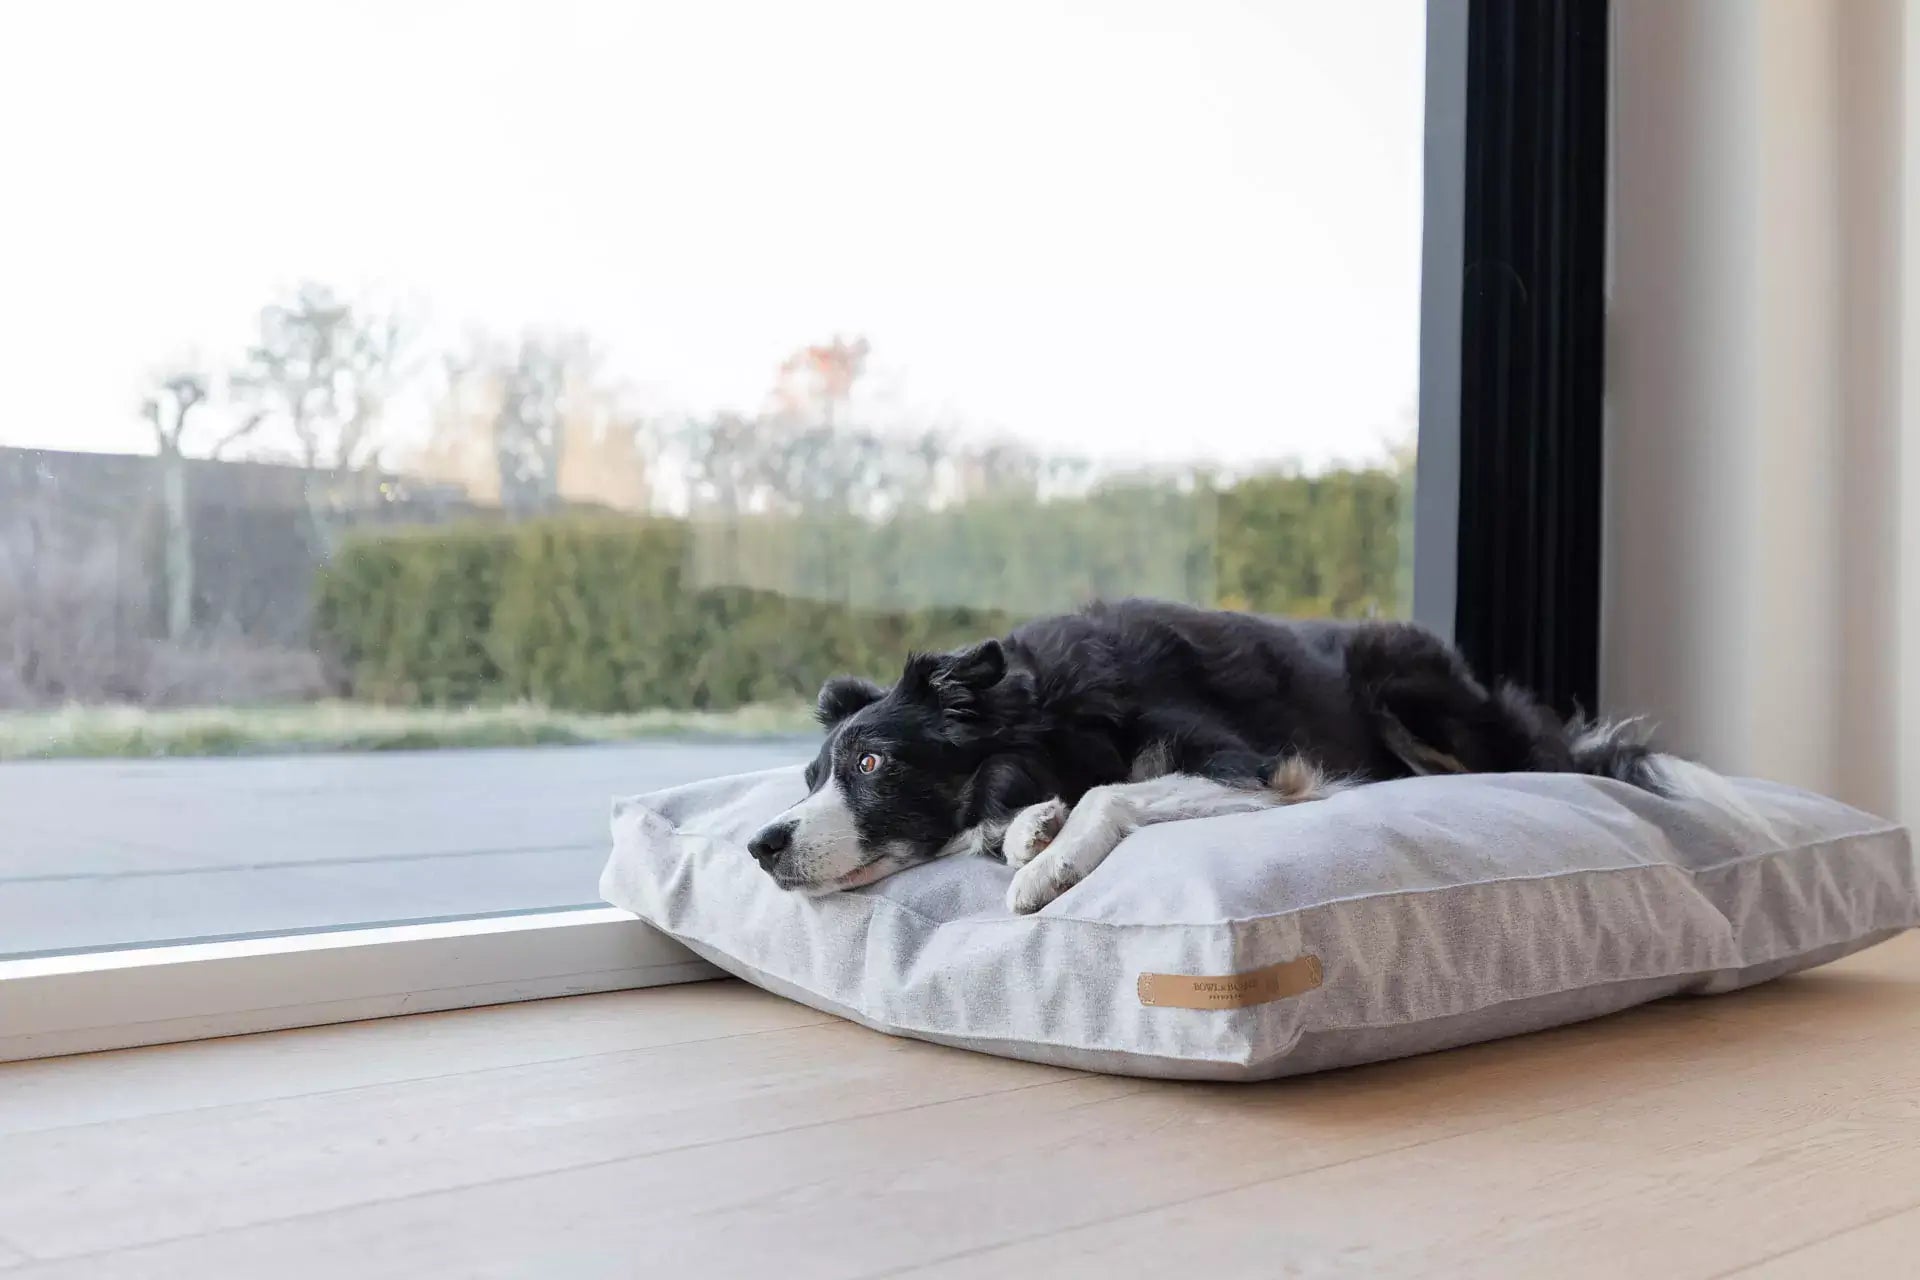 A dog lounging on a stylish Bowlandbone dog bed in front of a window.